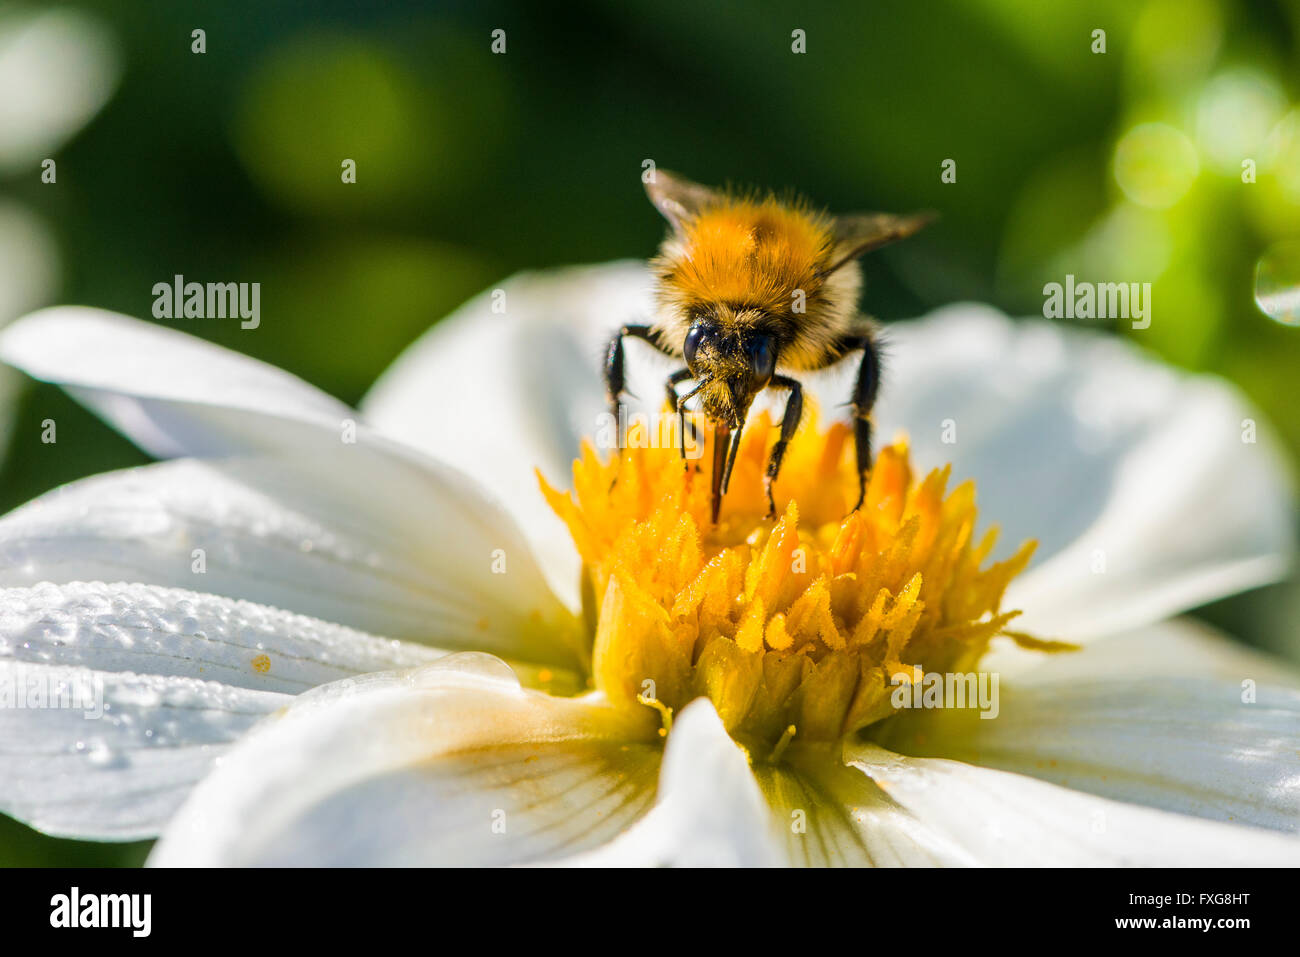 A Common carder bee (Bombus pascuorum) is collecting nectar from a Dahlia (Asteraceae) blossom, Saxony, Germany Stock Photo